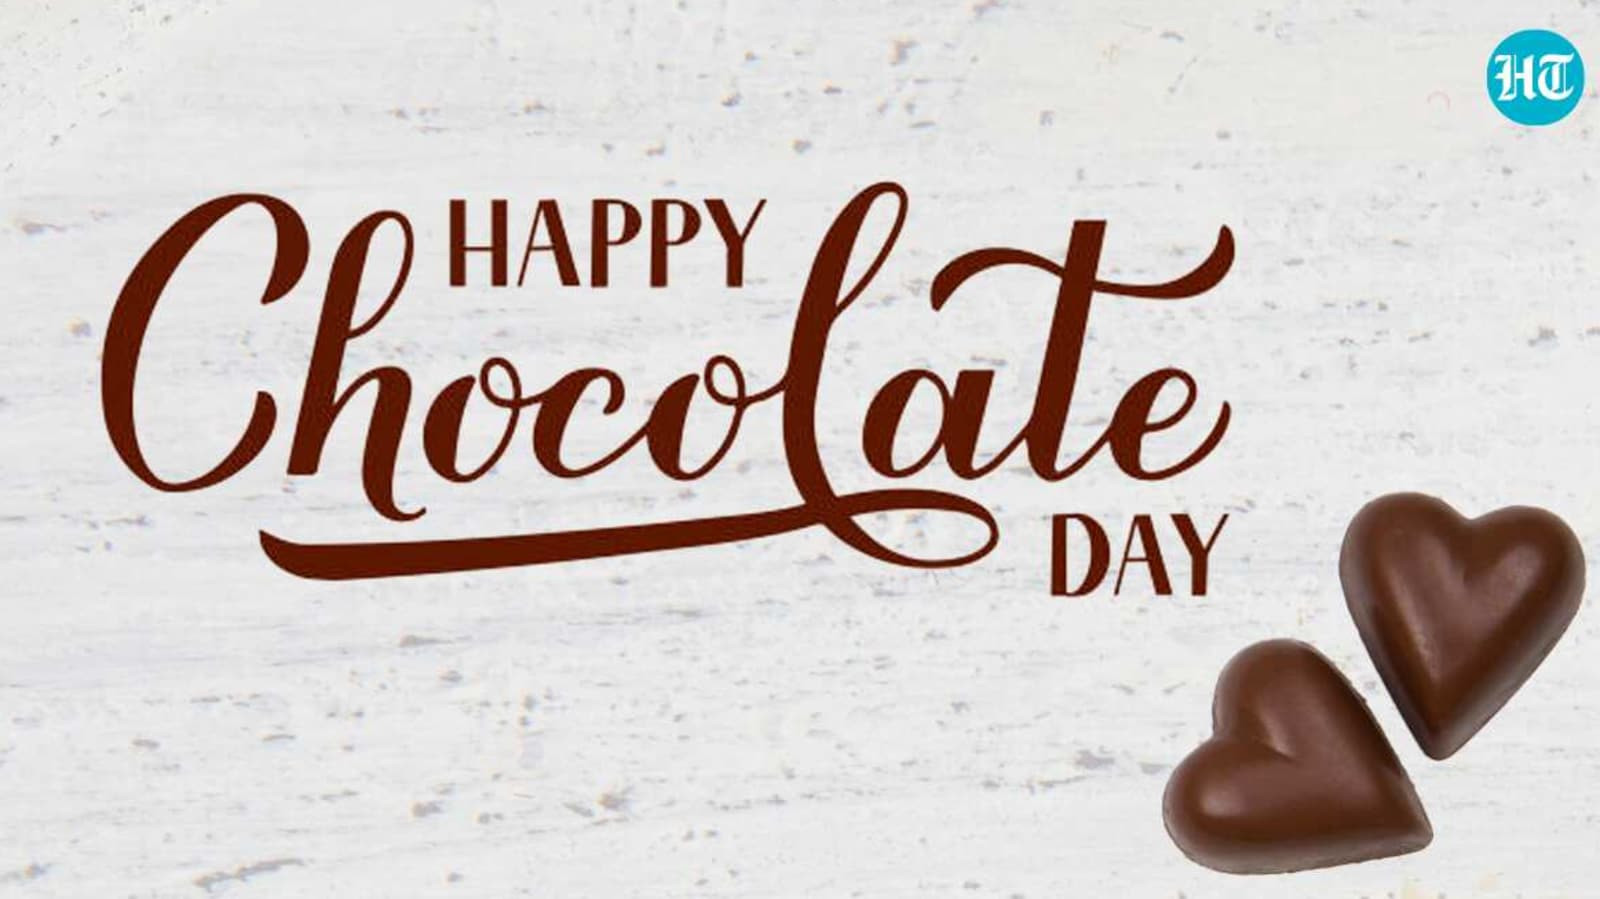 Chocolate Love Quotes
 Chocolate Day 2021 Wishes quotes to express your love